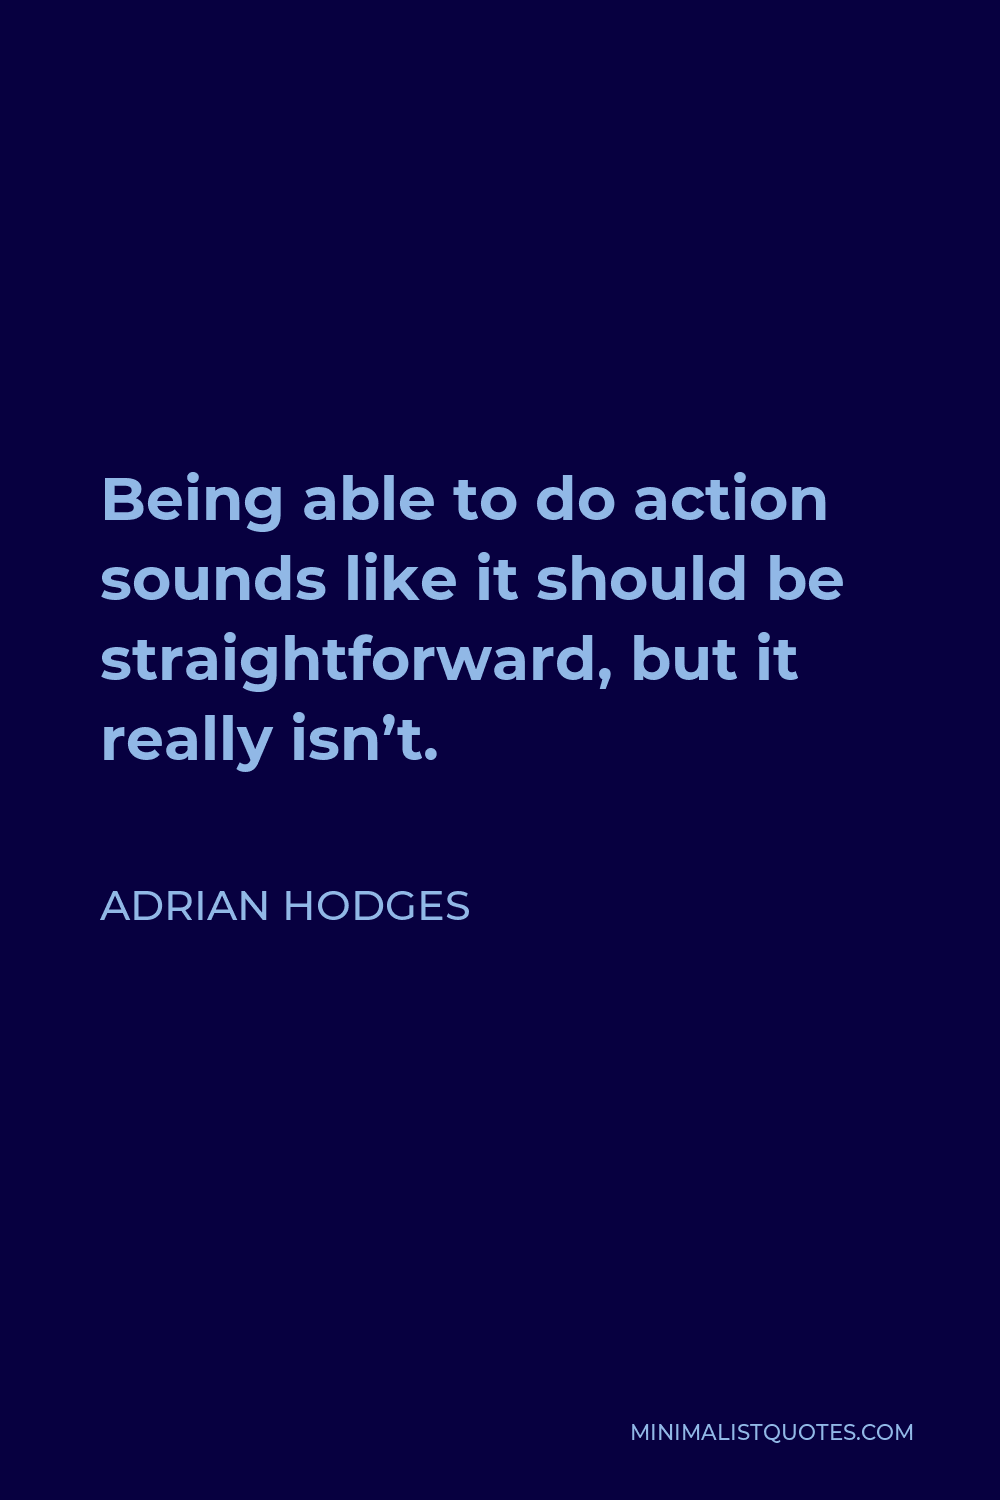 Adrian Hodges Quote - Being able to do action sounds like it should be straightforward, but it really isn’t.